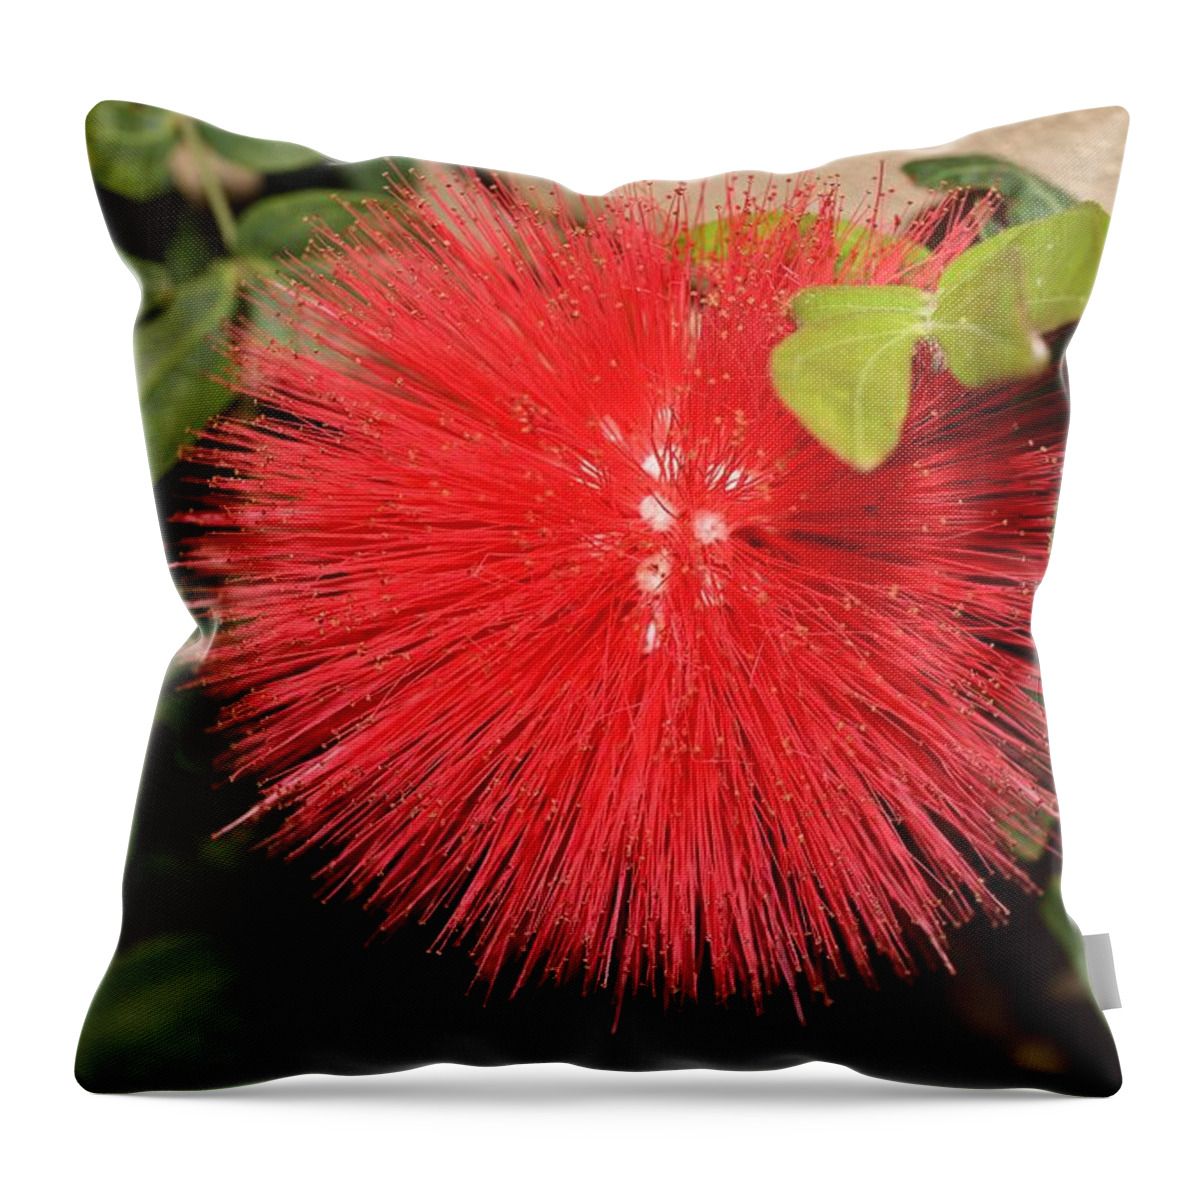 Red Powder Puff Throw Pillow featuring the photograph Red Powder Puff Flower by Mingming Jiang